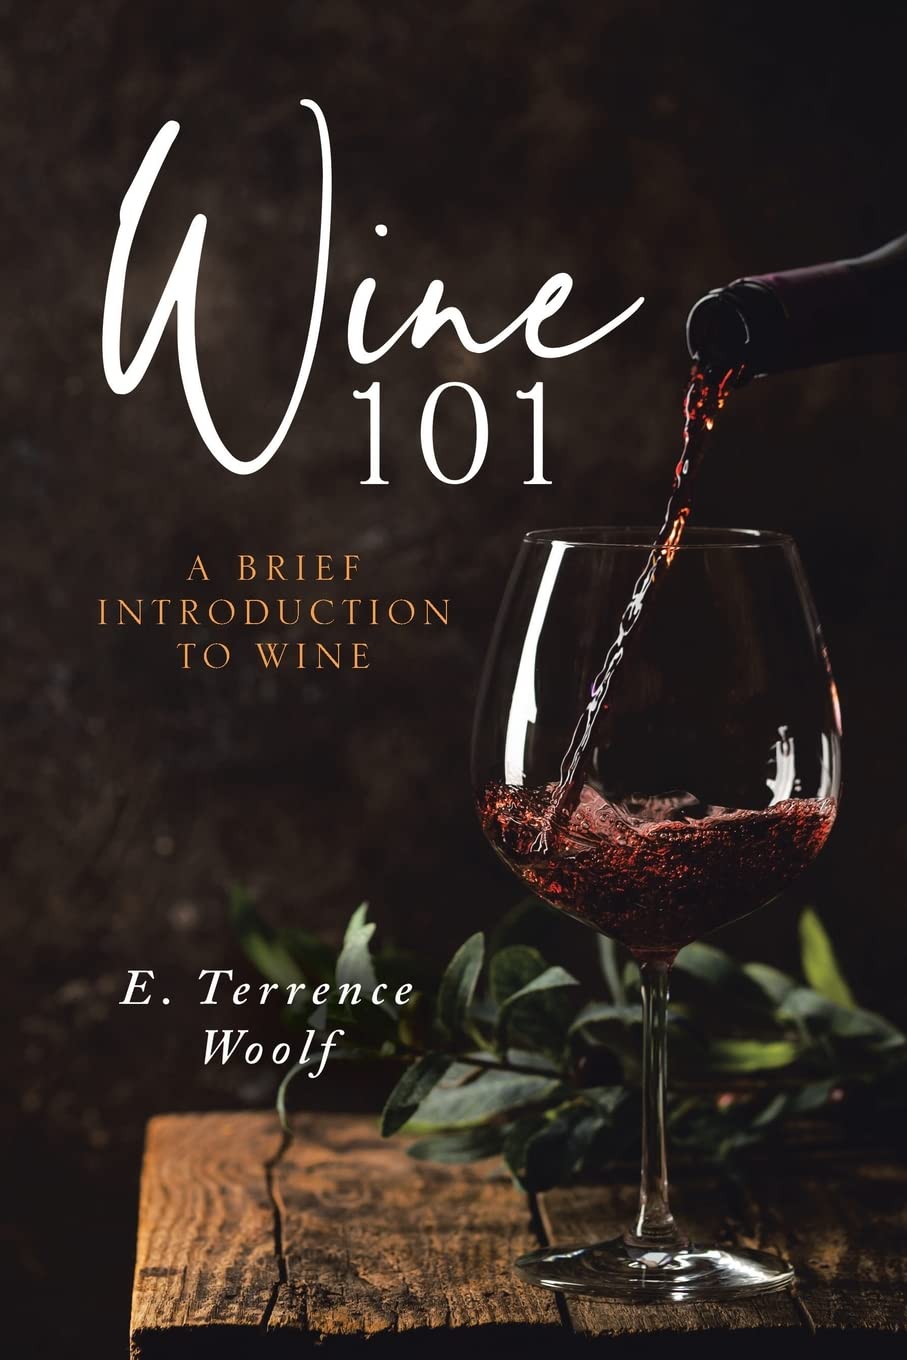 Author's Tranquility Press Backs E Terrence Woolfe As He Delivers A Guide in Wine 101